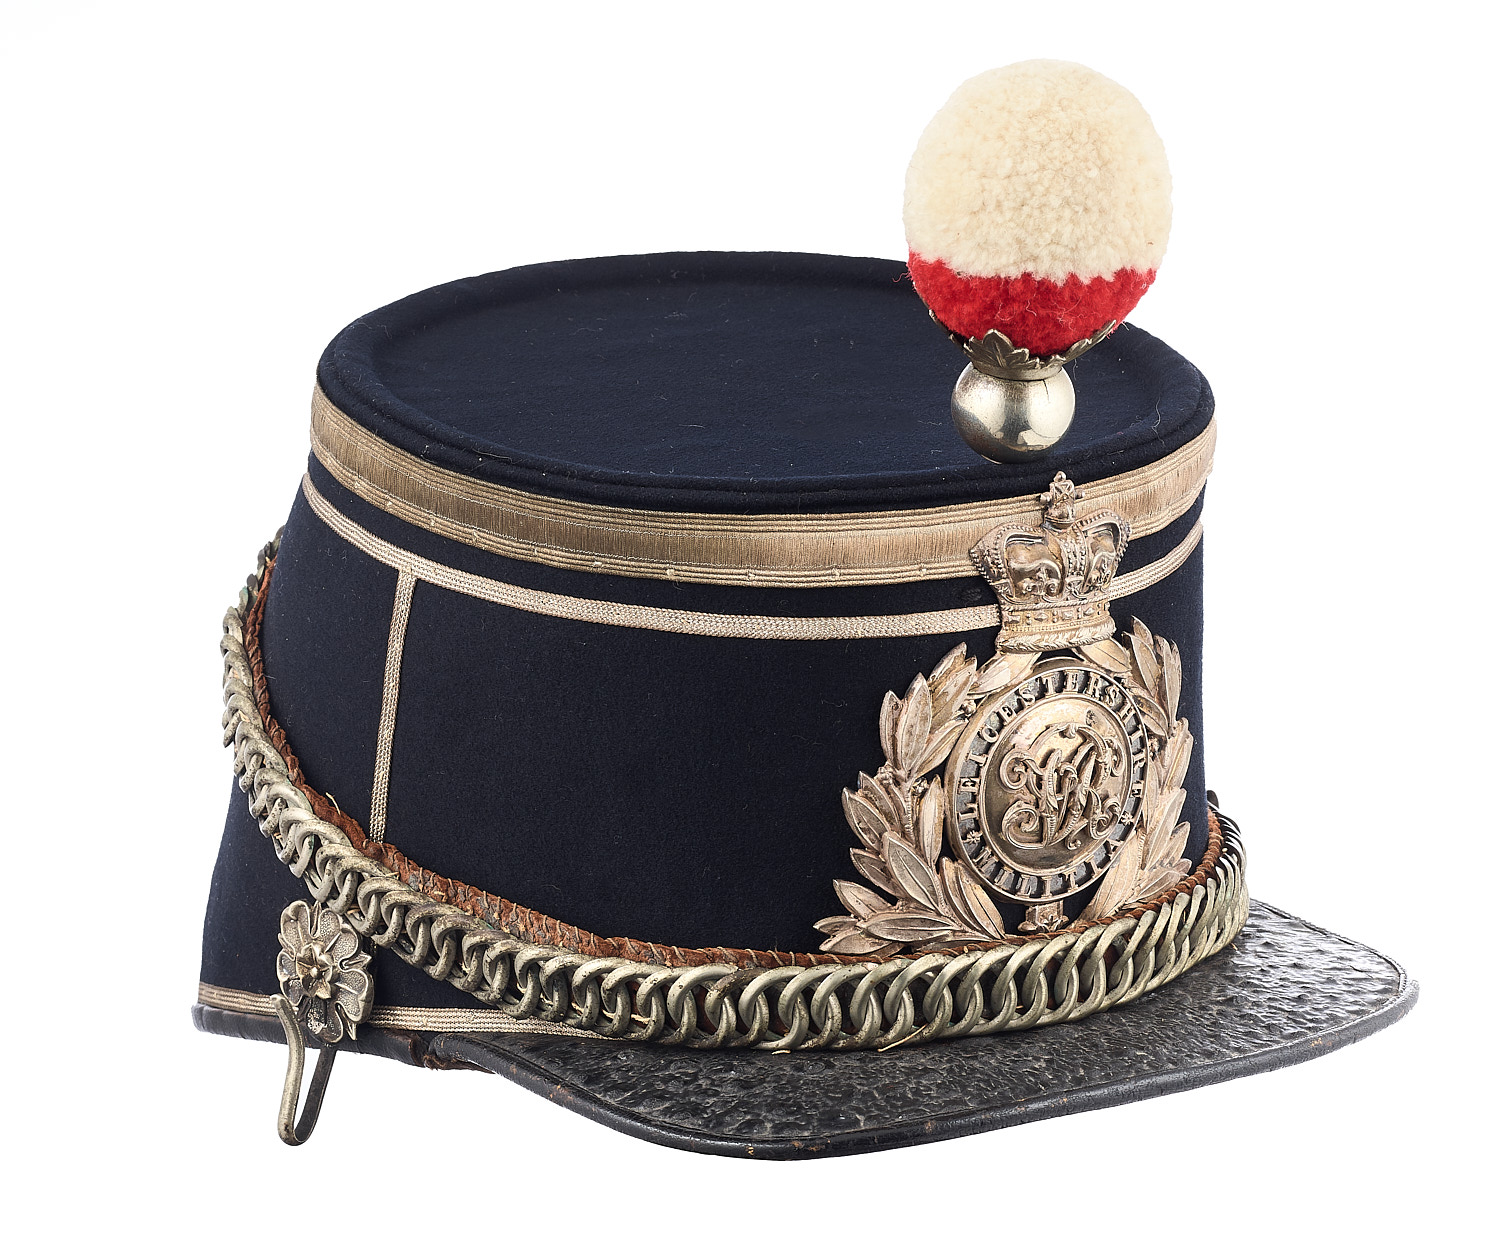 Leicestershire Militia Victorian Officer quilted shako circa 1869-1878. Good scarce example of